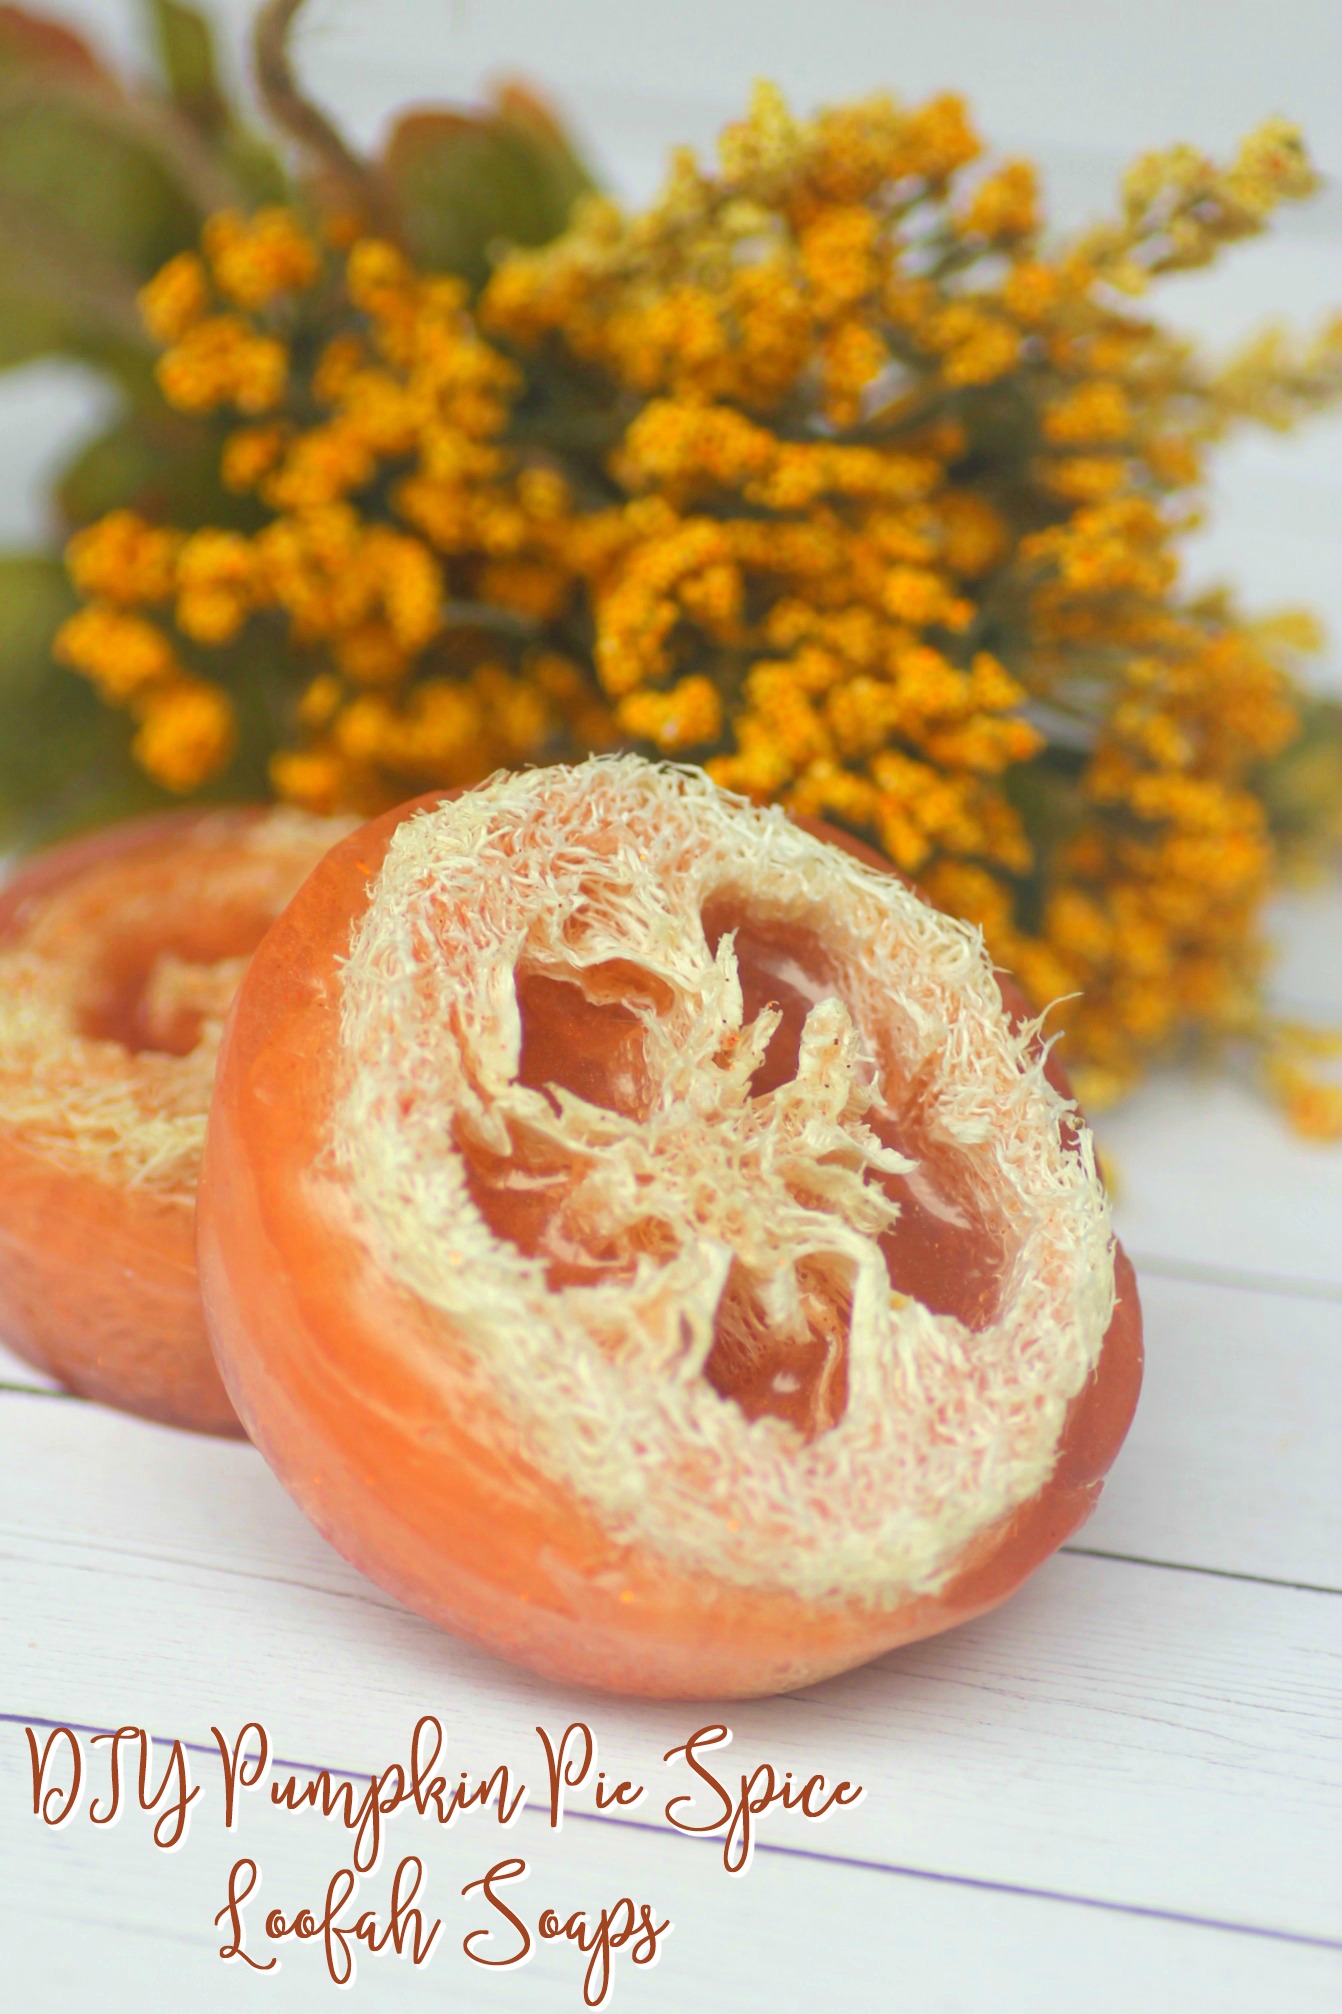 These DIY Pumpkin Pie Spice Loofah Soaps is a fantastic for exfoliating, cleaning and moisturizing your skin! Not to mention, they smell AMAZING!